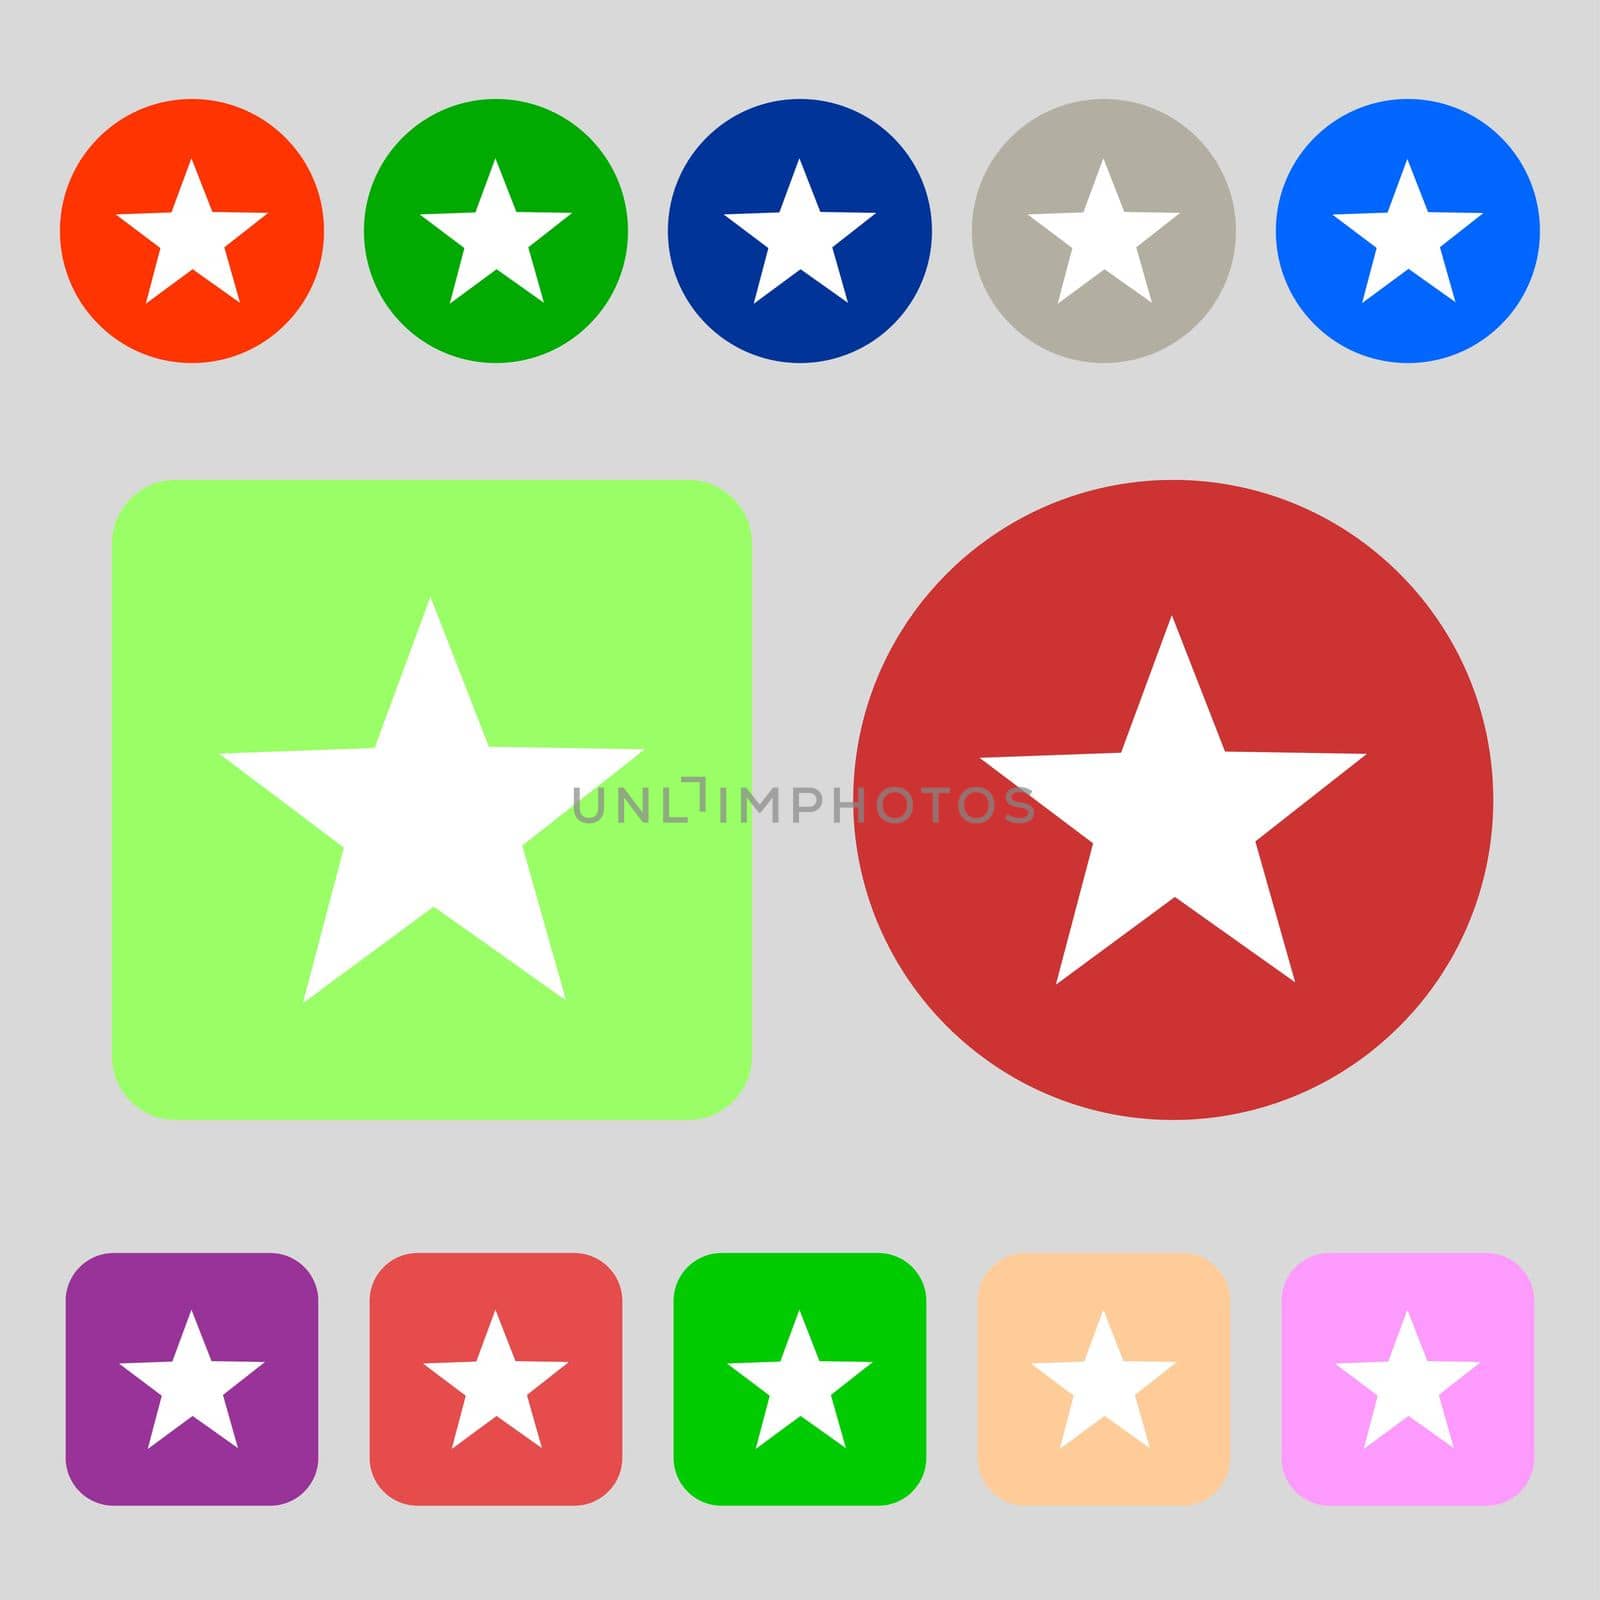 Star sign icon. Favorite button. Navigation symbol. 12 colored buttons. Flat design.  by serhii_lohvyniuk